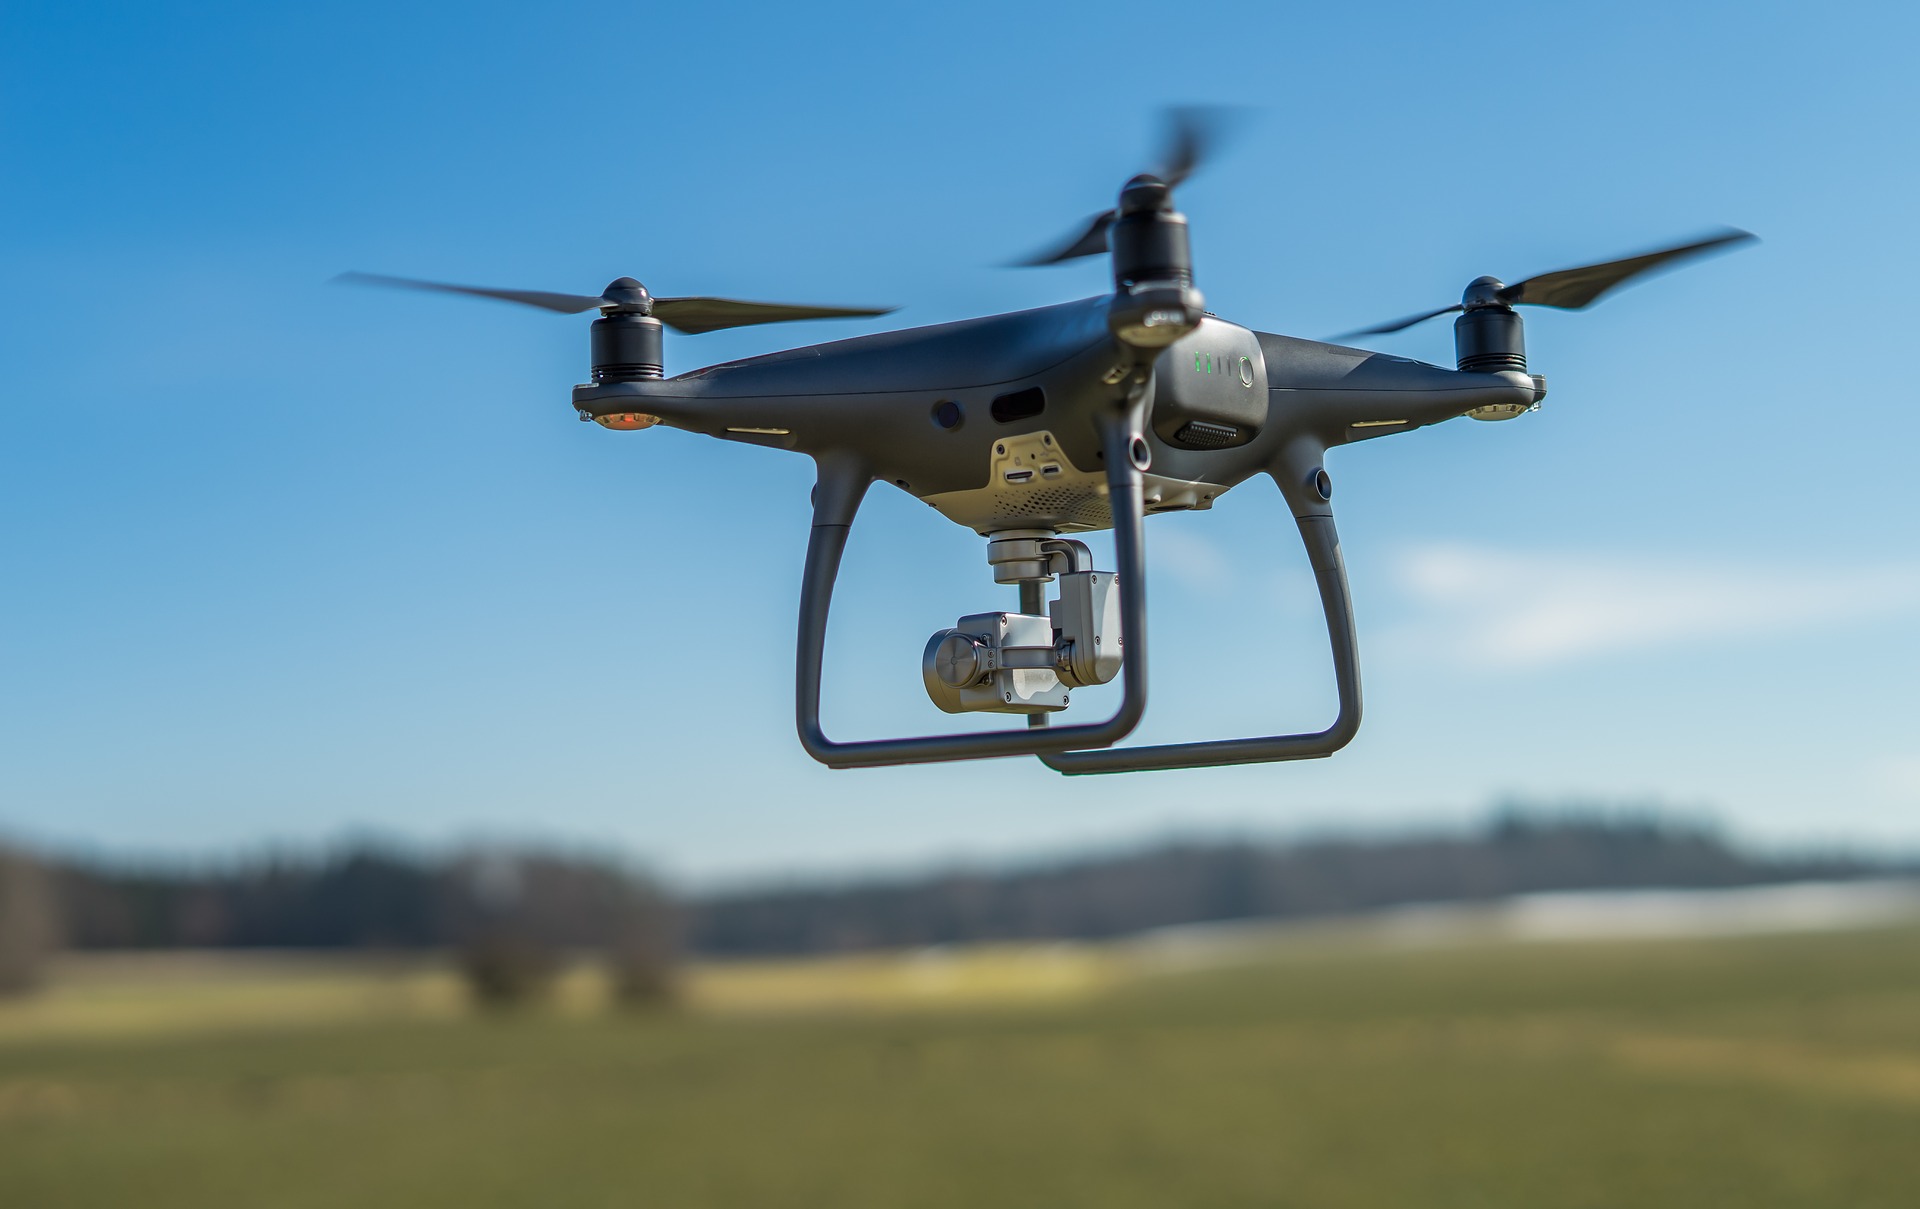 New drone legislation will police respond to emergencies and protect communities